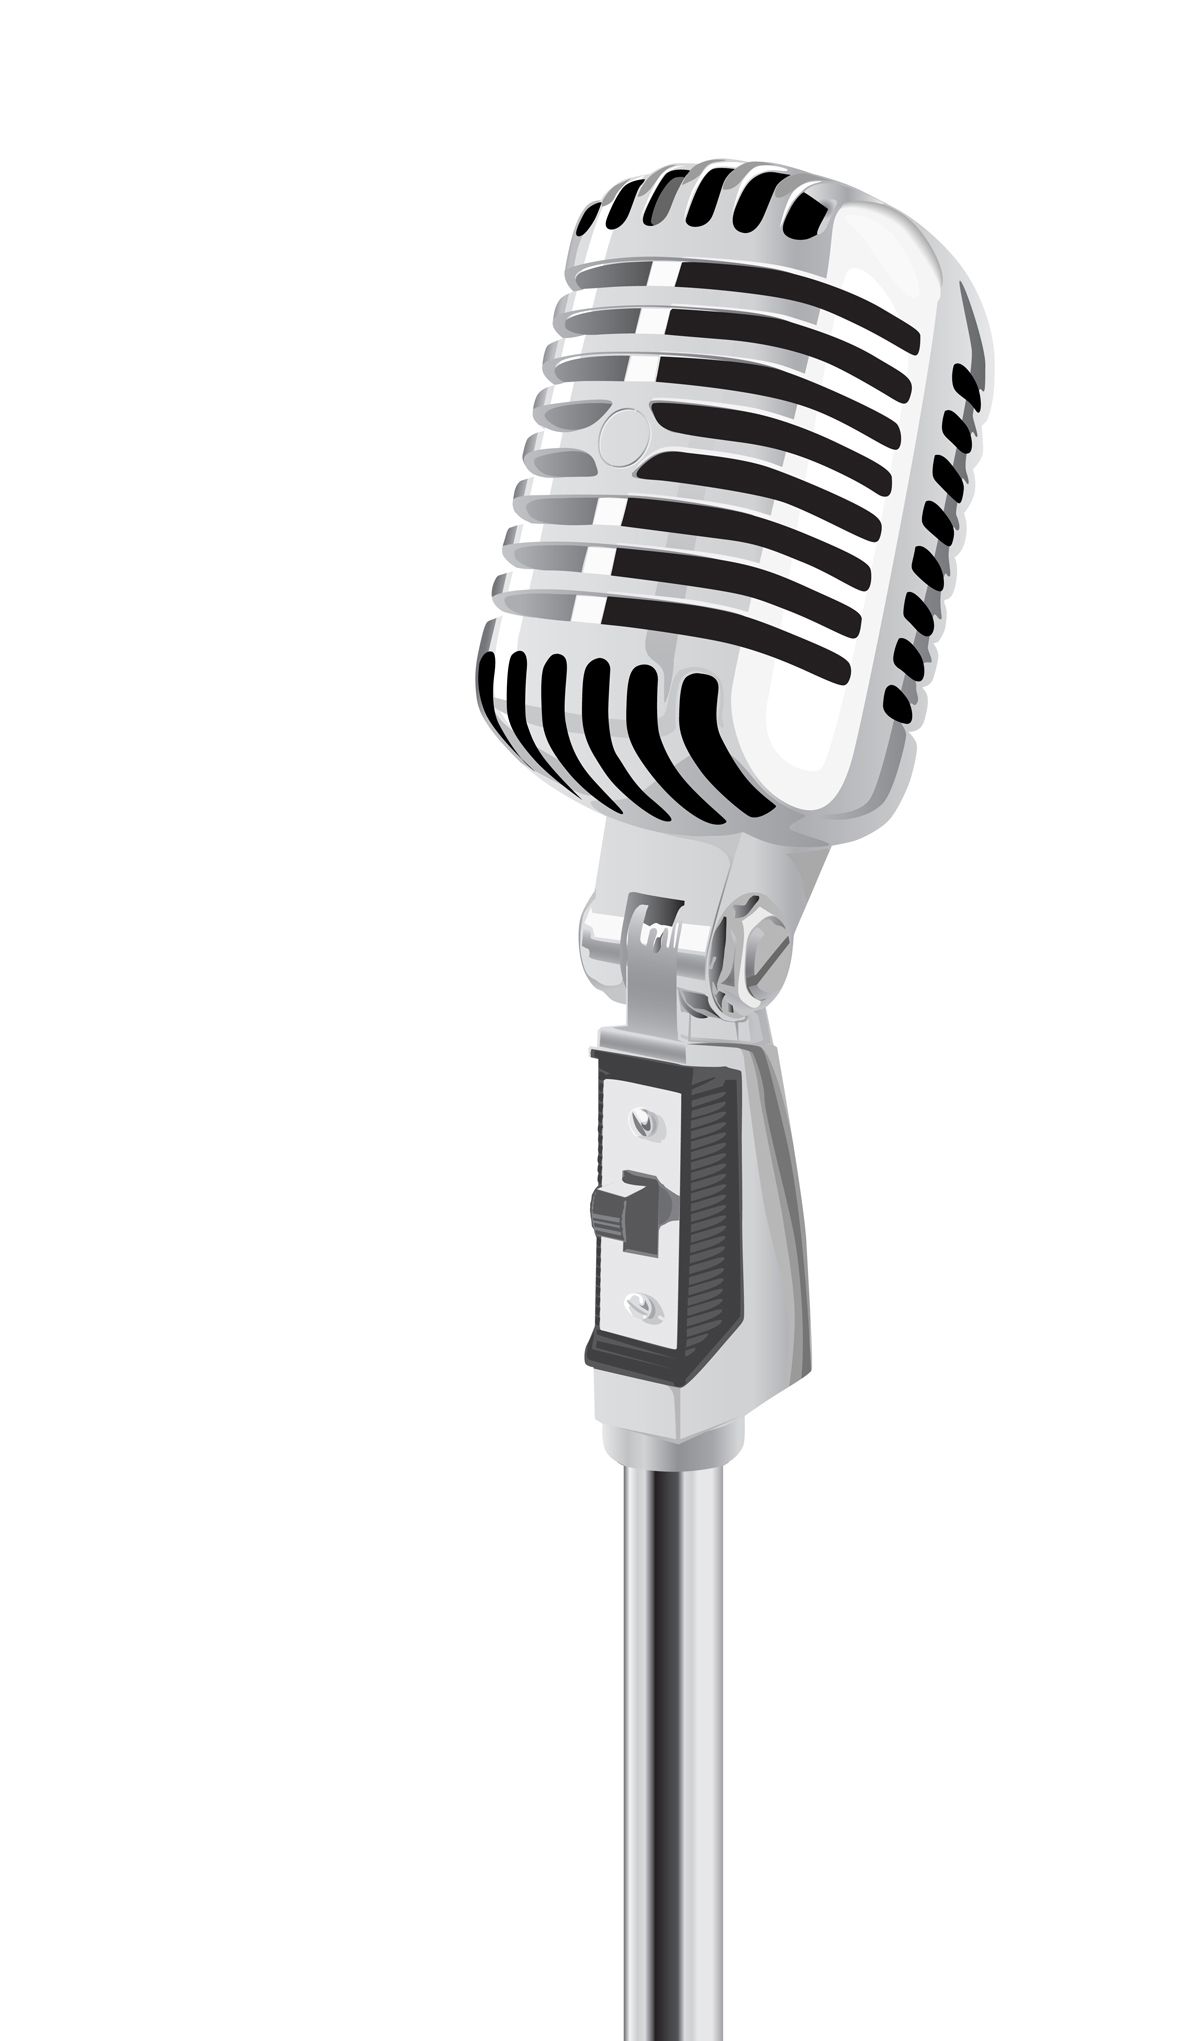 Black and white microphone clipart clipart kid - Clipartix